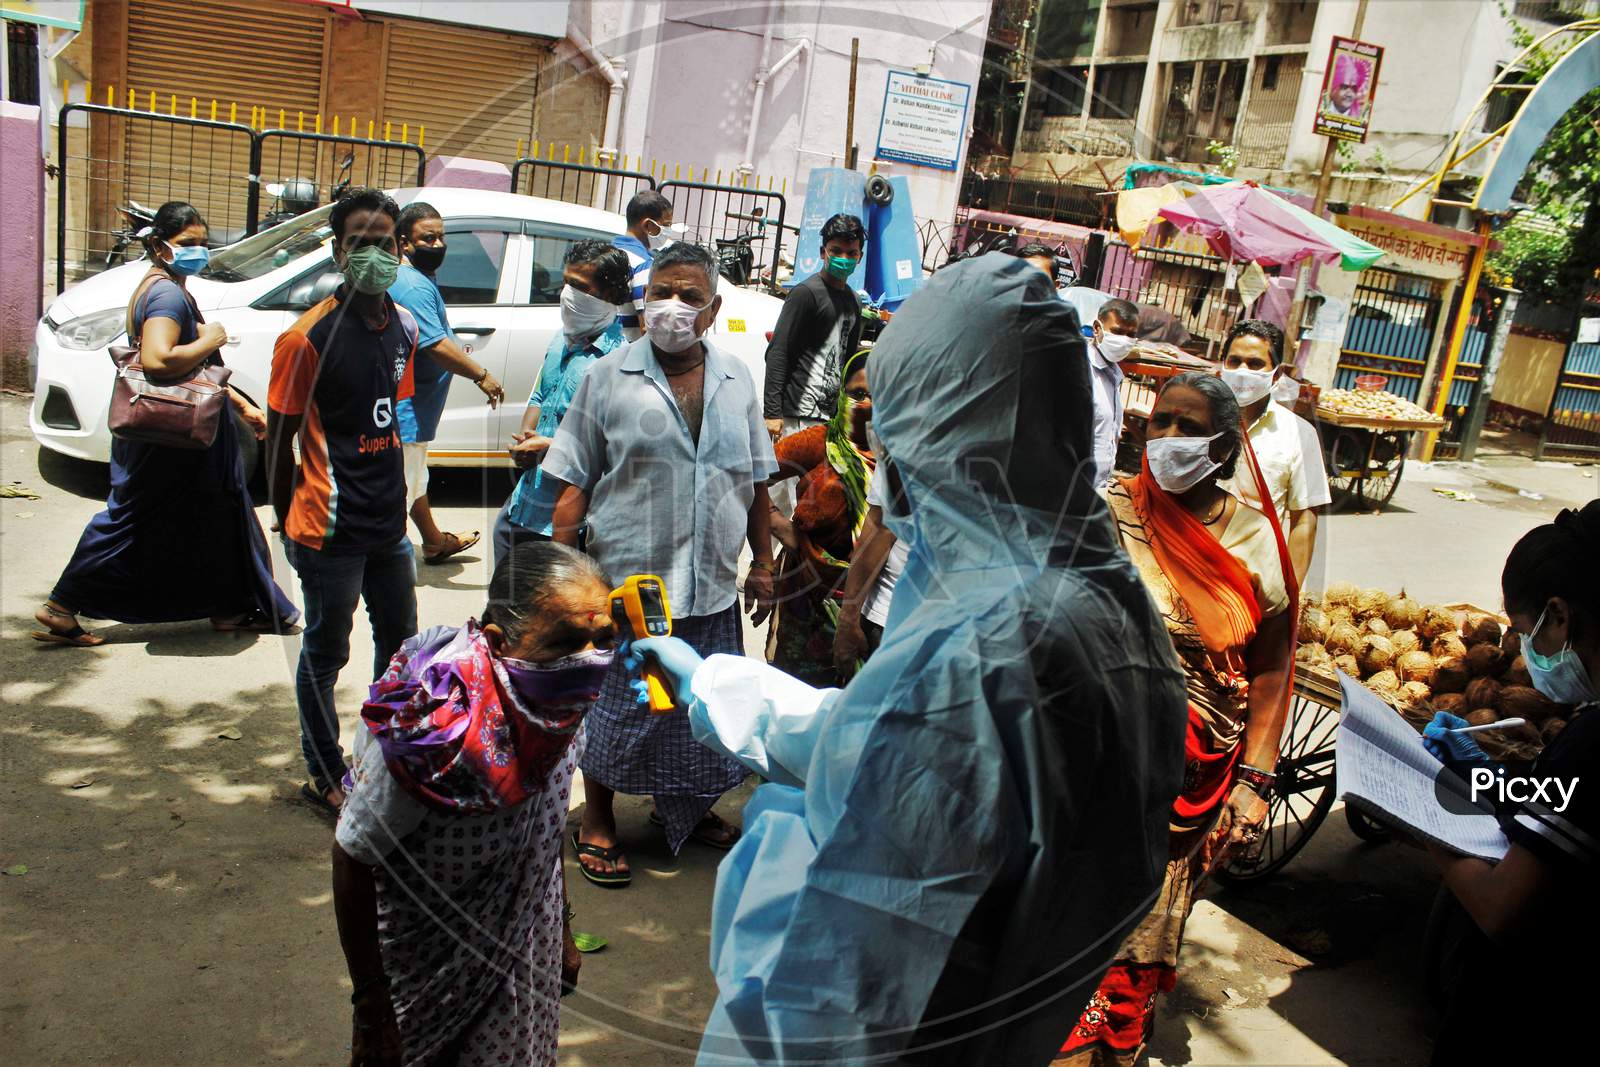 A health care worker wearing personal protective equipment (PPE) checks the temperature of a resident at Dharavi, one of Asia's largest slums, as a preventative measure against the spread of coronavirus disease, in Mumbai, India on June 21, 2020.